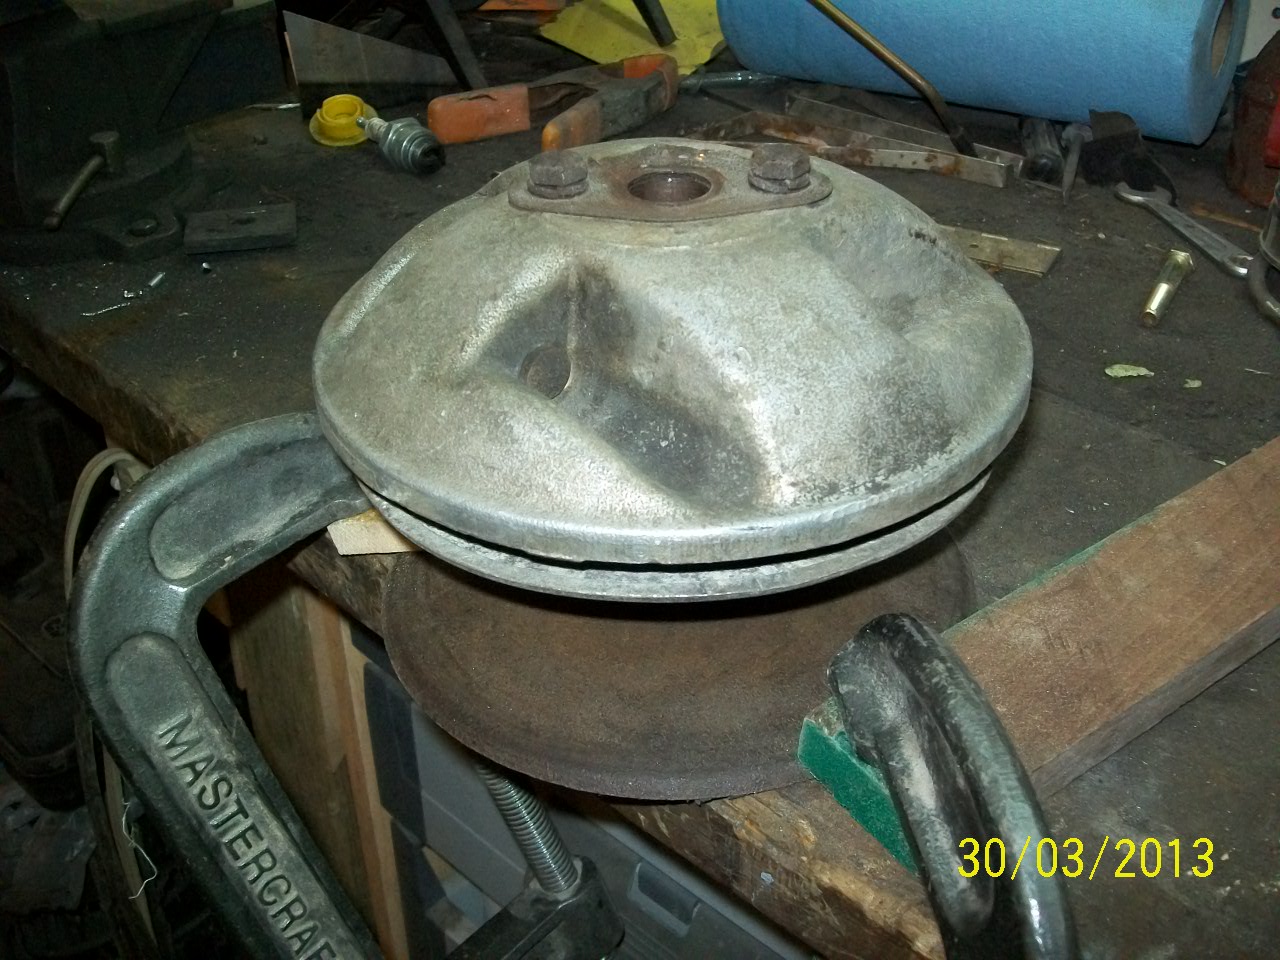 securing clutch to bench 002.jpg